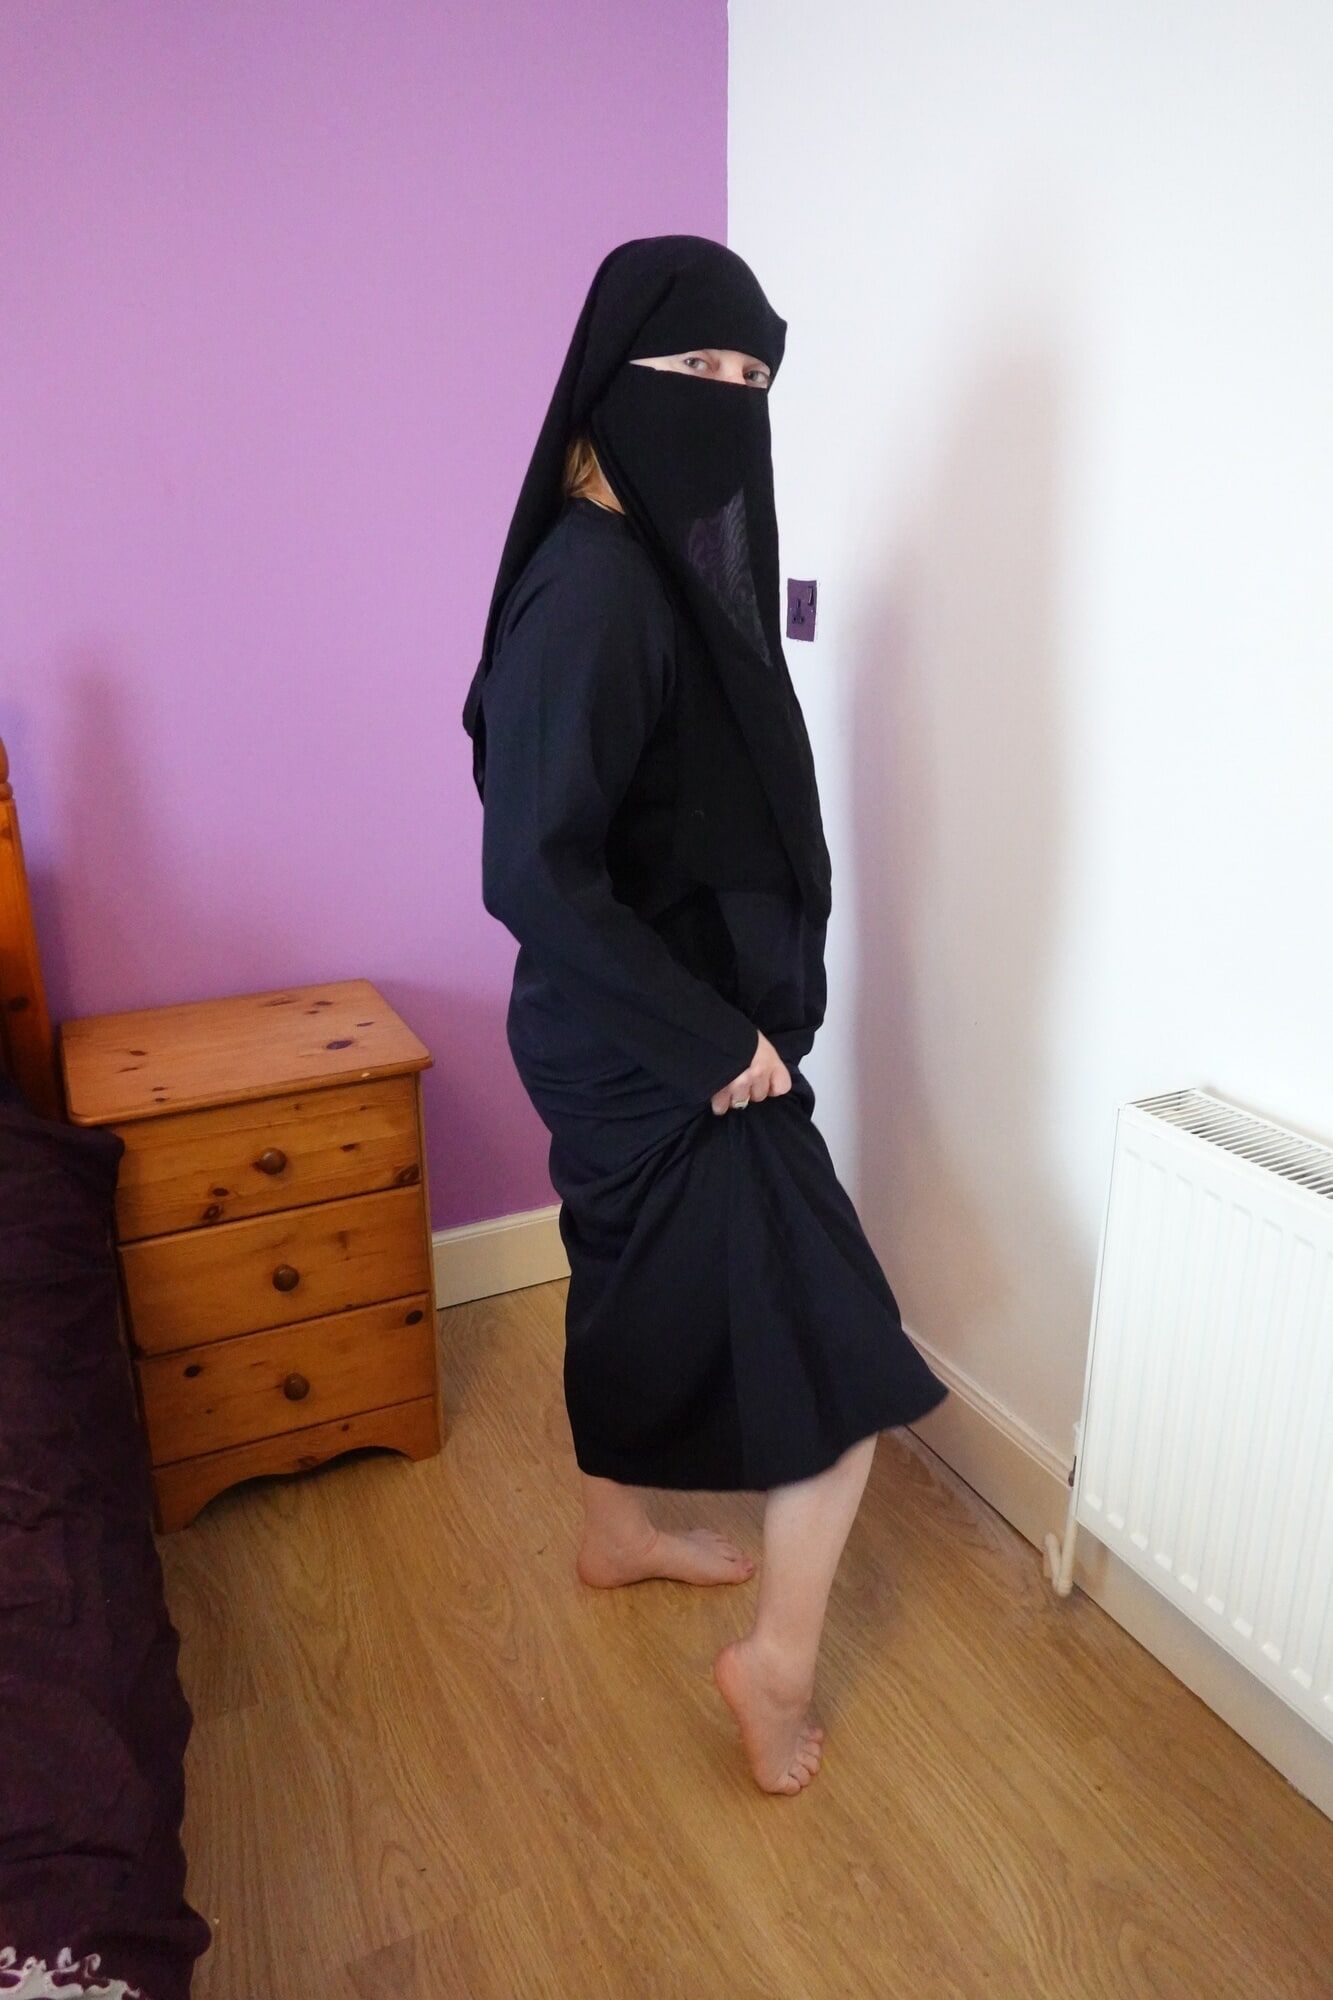 wife wearing Burqa with Niqab naked underneath #2